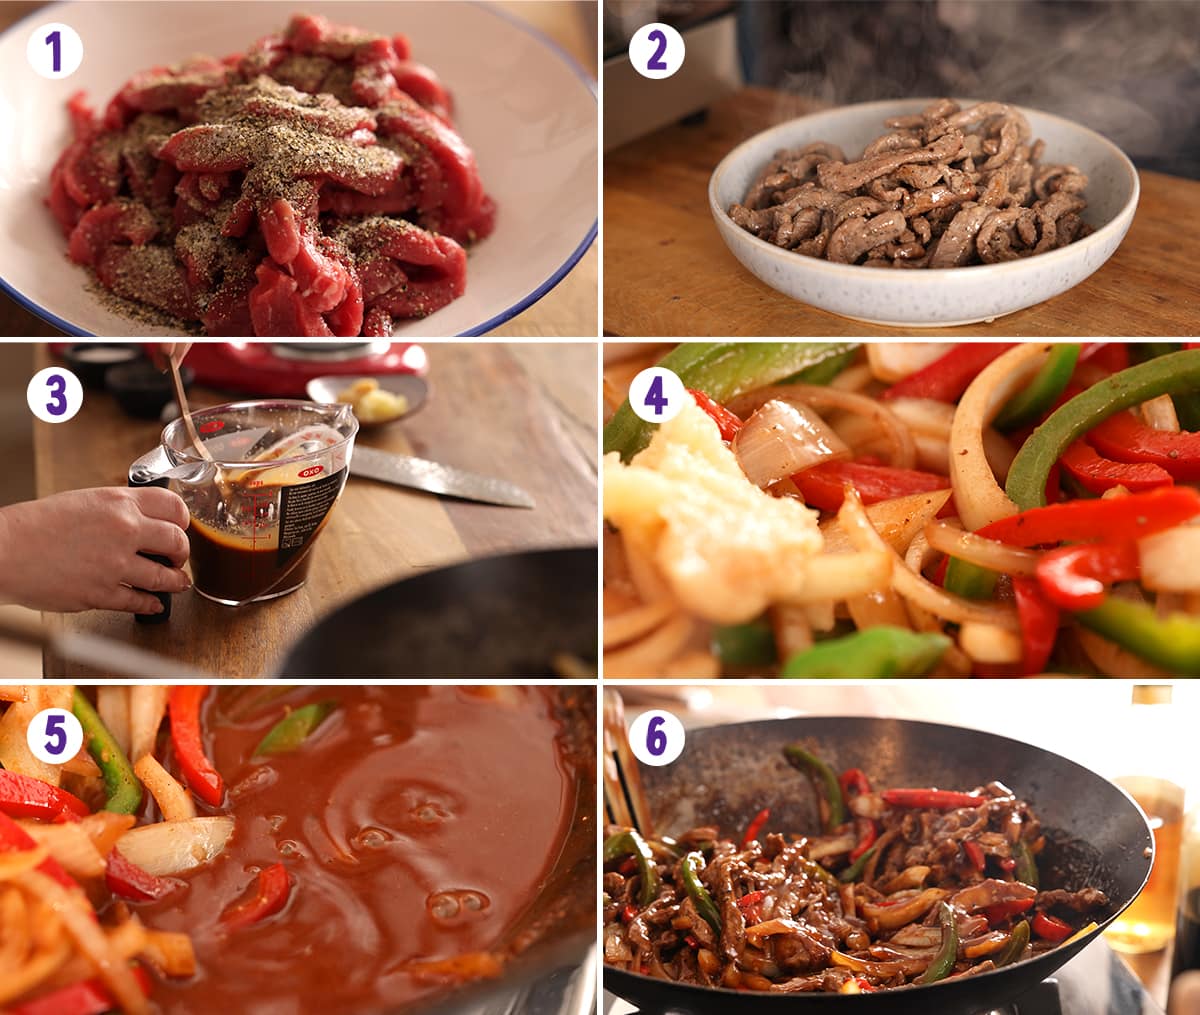 6 image collage showing how to make black pepper beef stir fry.